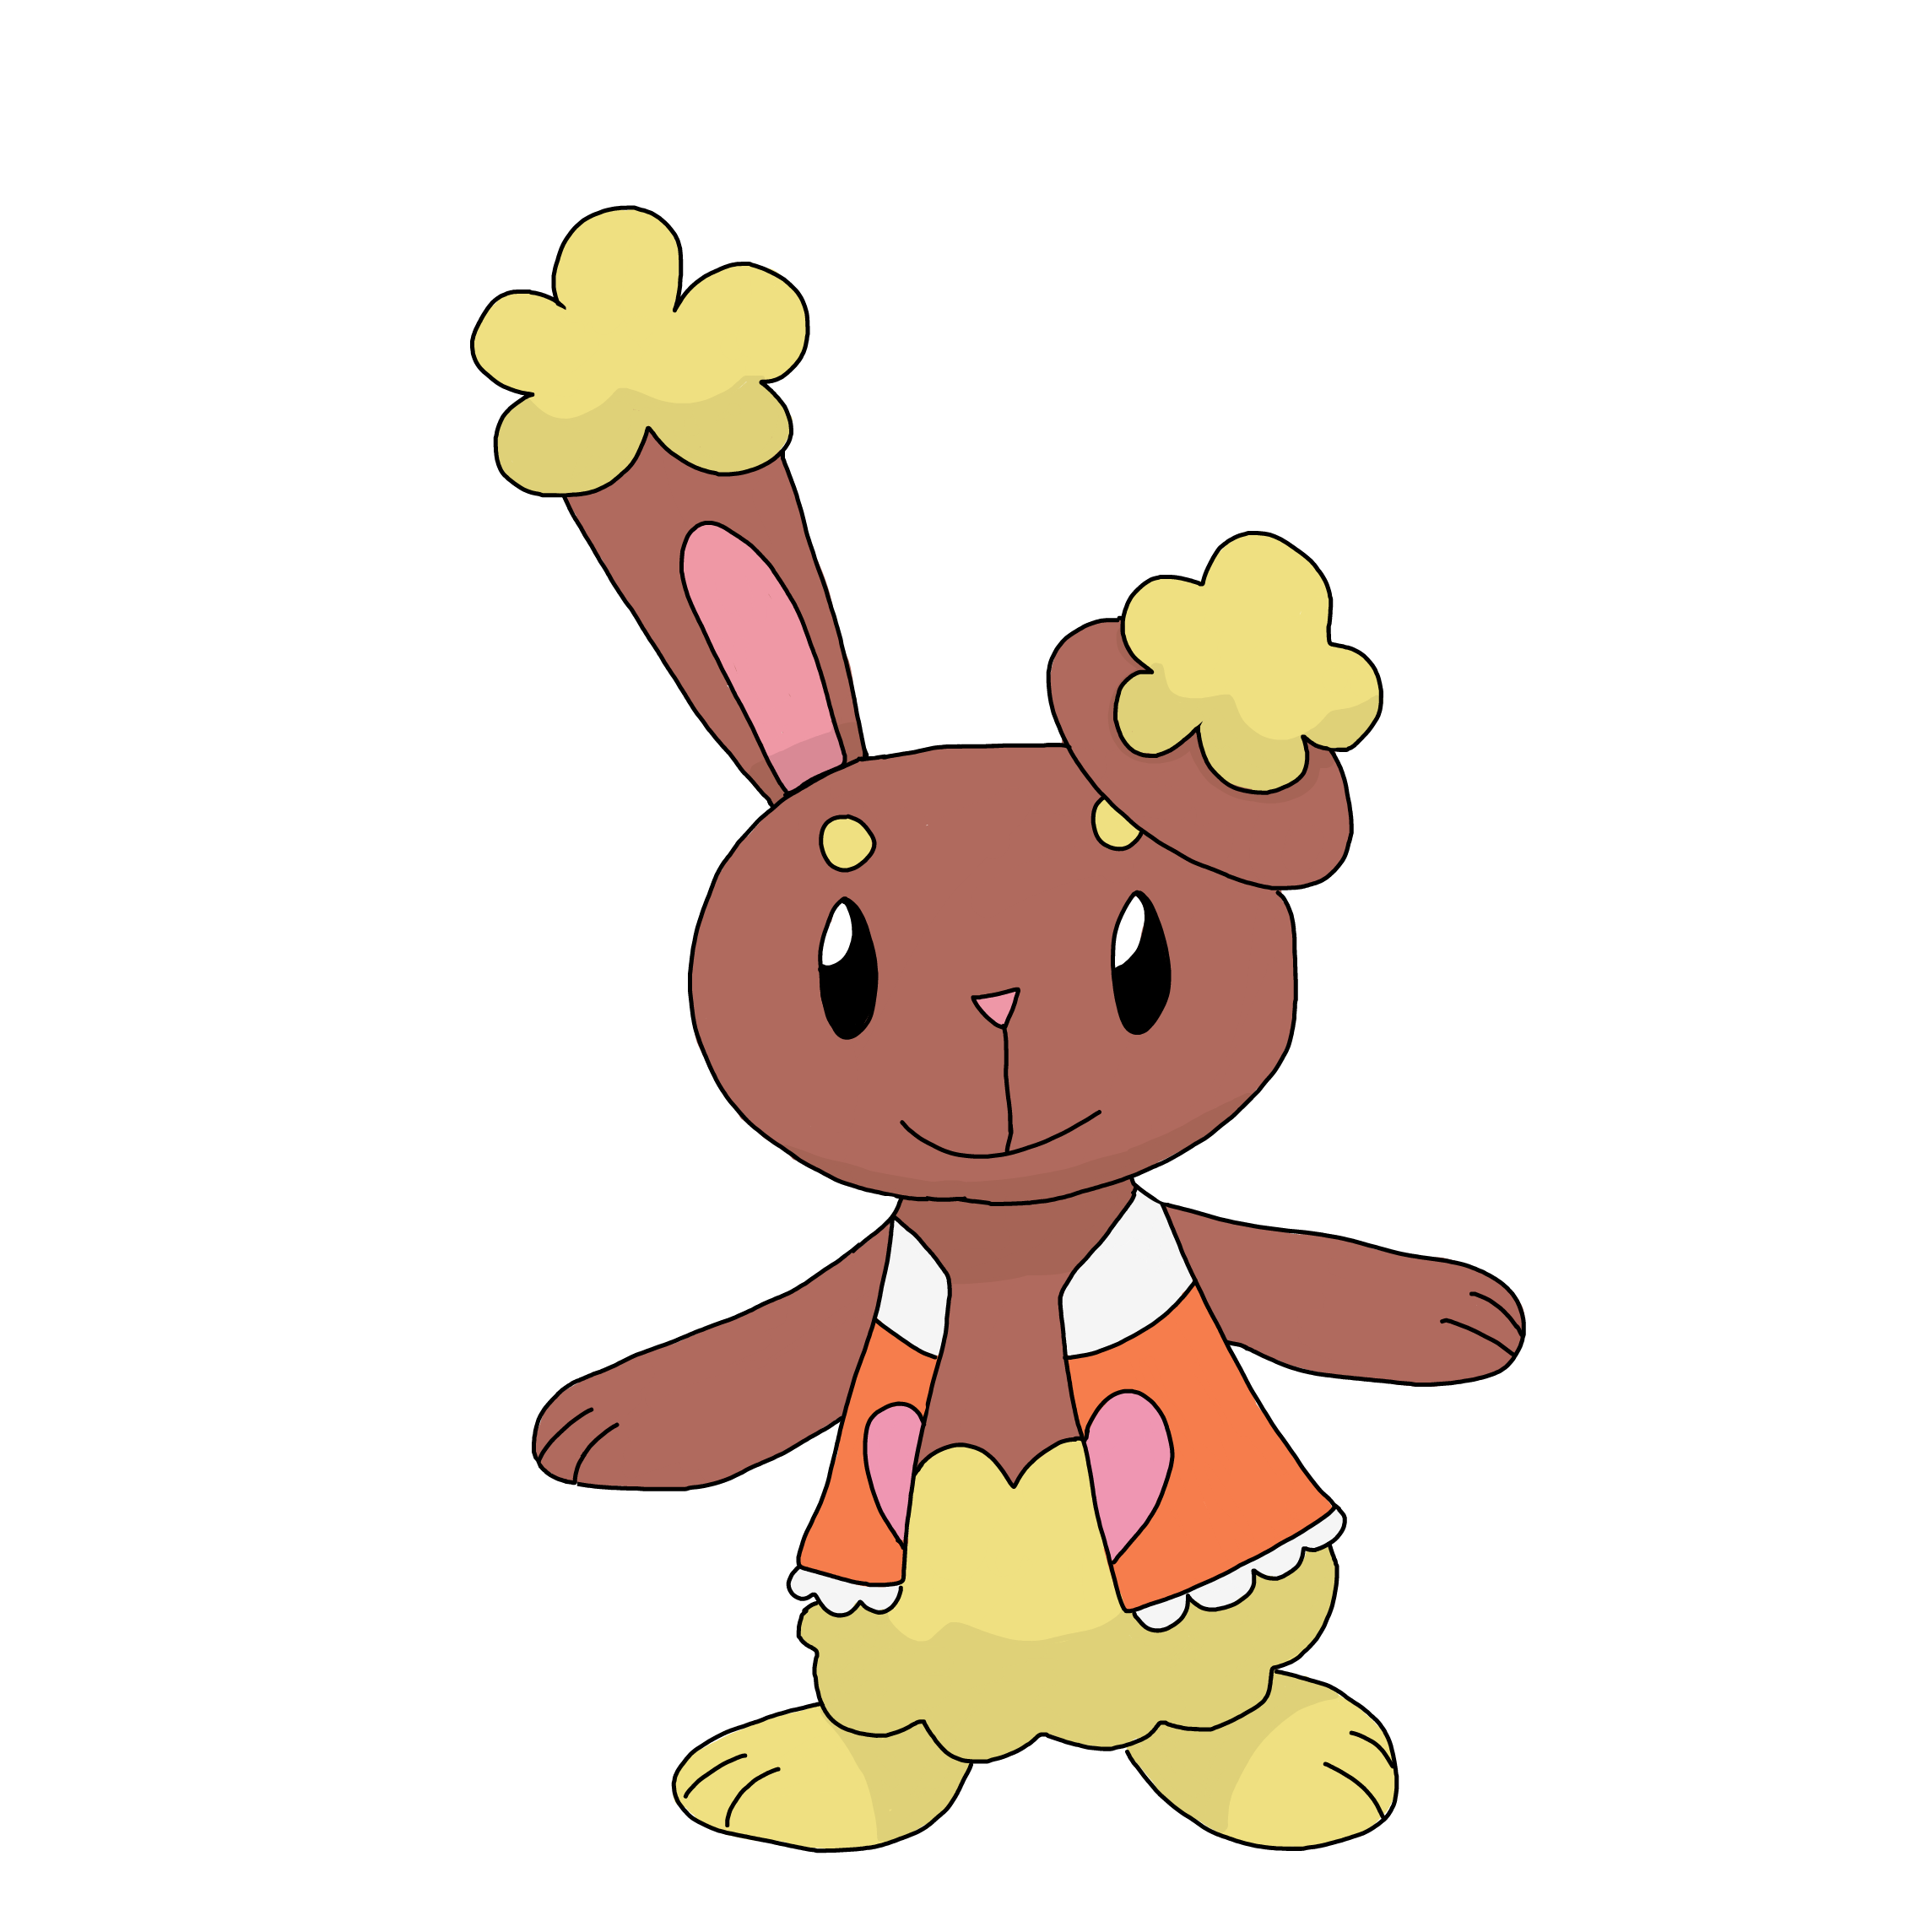 Buneary Pokemon PNG HD Images